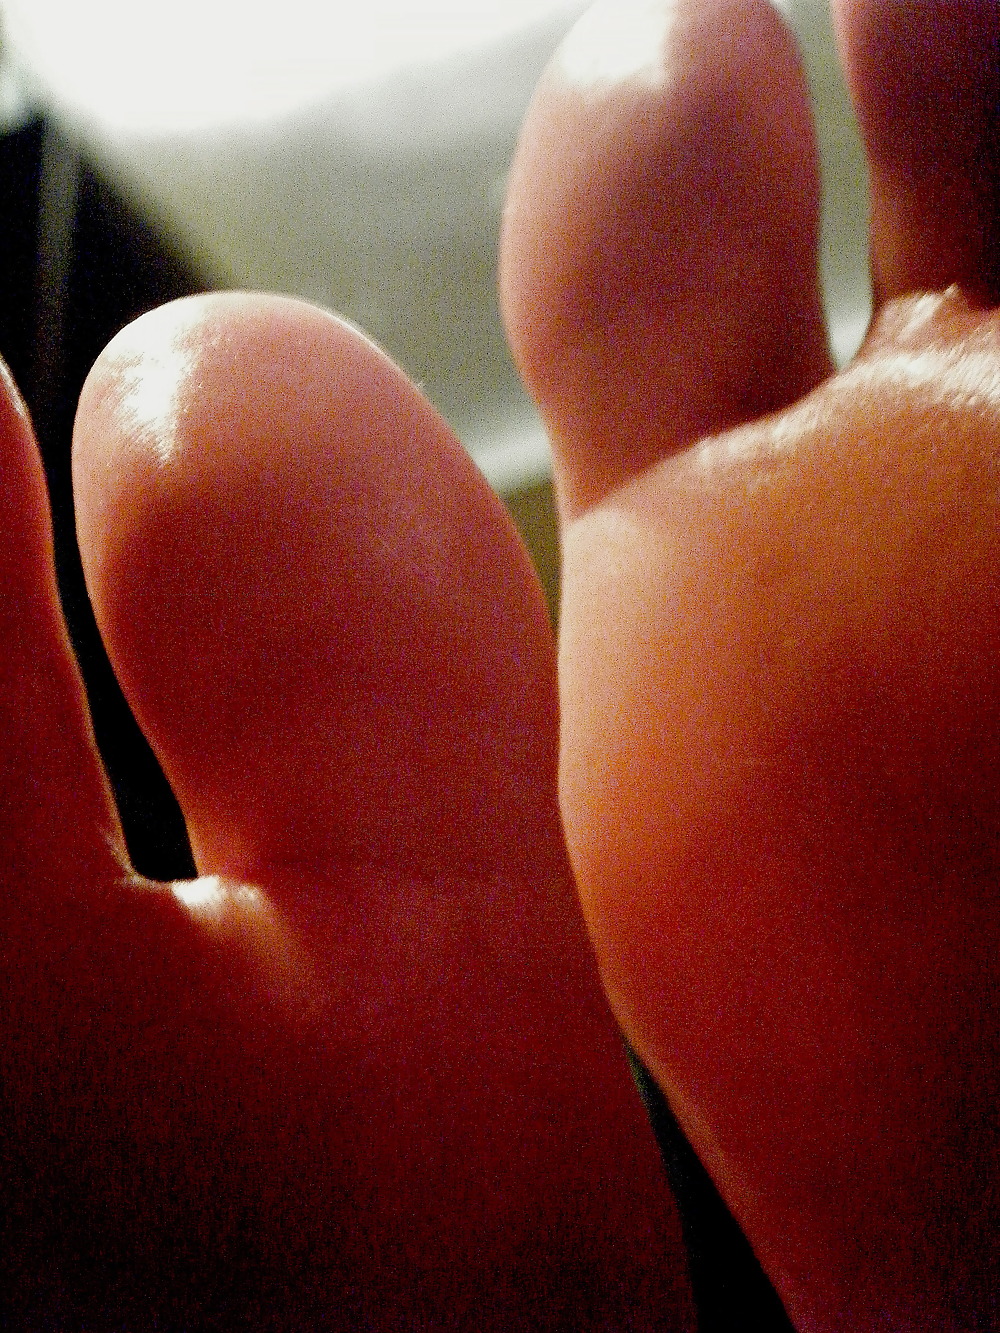 Free More candid shots of my wife's exquisite feet and toes photos